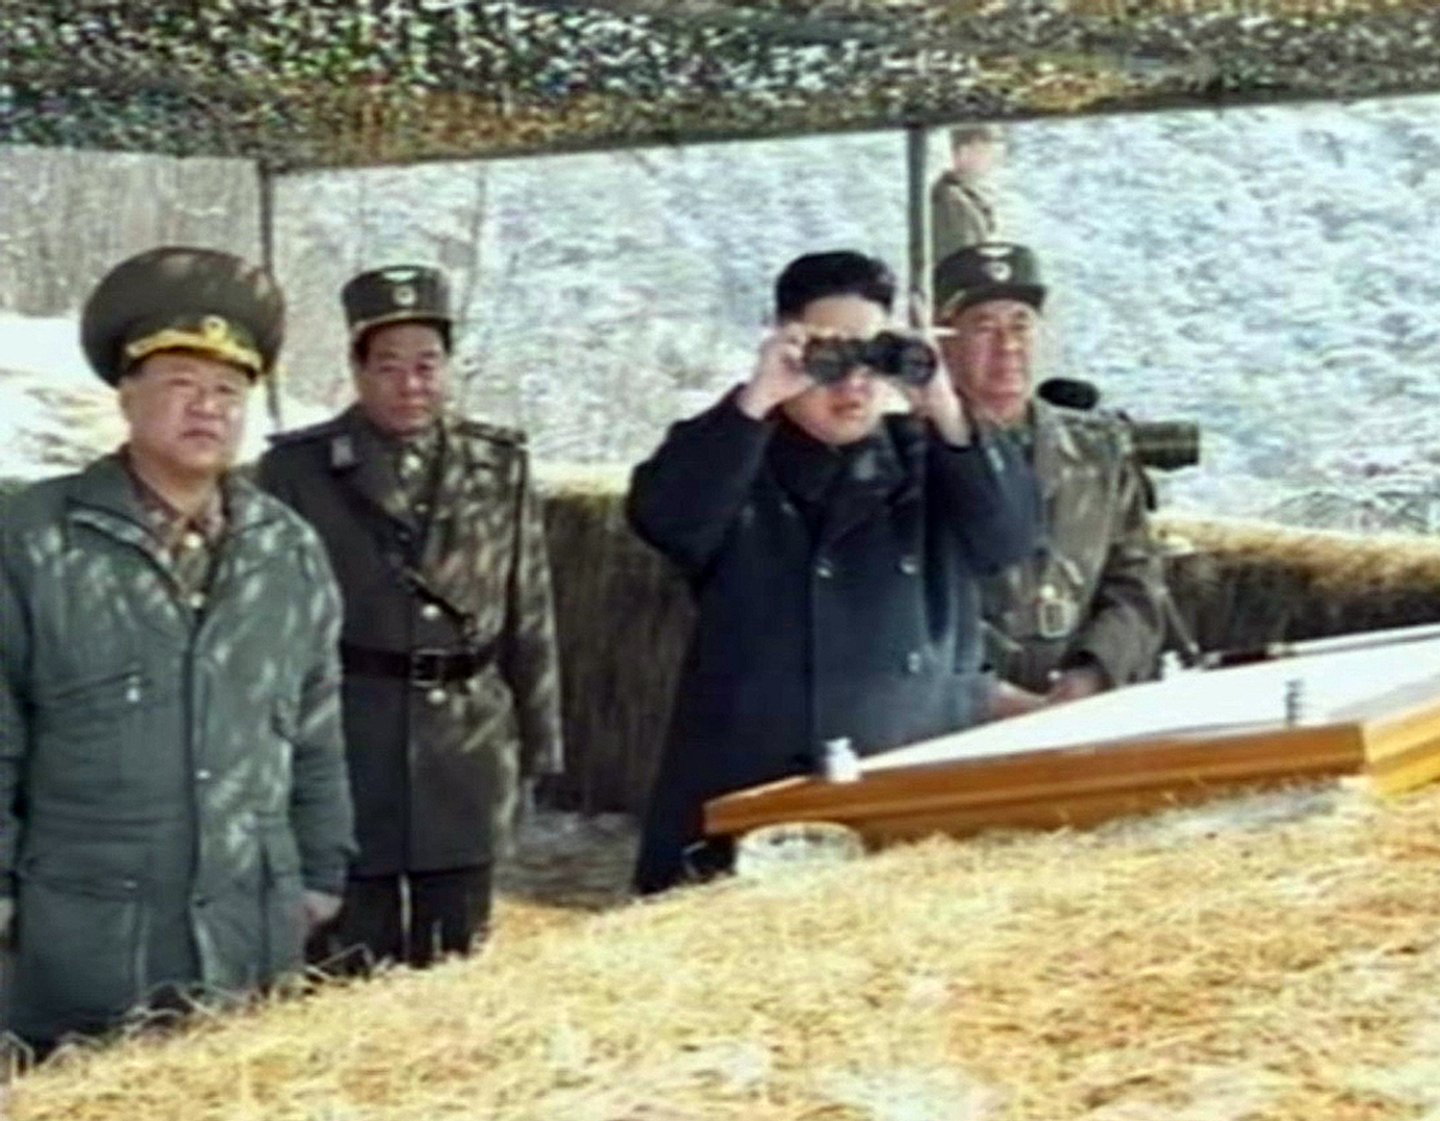 This video grab taken from North Korean TV on March 20, 2013 shows North Korean leader Kim Jong-Un's overseeing a live fire military drill. Kim Jong-Un oversaw a live fire military drill using drones and cruise missile interceptors, state media said, amid heightened tensions on the Korean peninsula. ----EDITORS NOTE --- RESTRICTED TO EDITORIAL USE - MANDATORY CREDIT " AFP PHOTO / NORTH KOREAN TV" - NO MARKETING NO ADVERTISING CAMPAIGNS - DISTRIBUTED AS A SERVICE TO CLIENTS - AFP PHOTO/HO/NORTH KOREAN TV (Photo credit should read NORTH KOREAN TV/AFP/Getty Images)